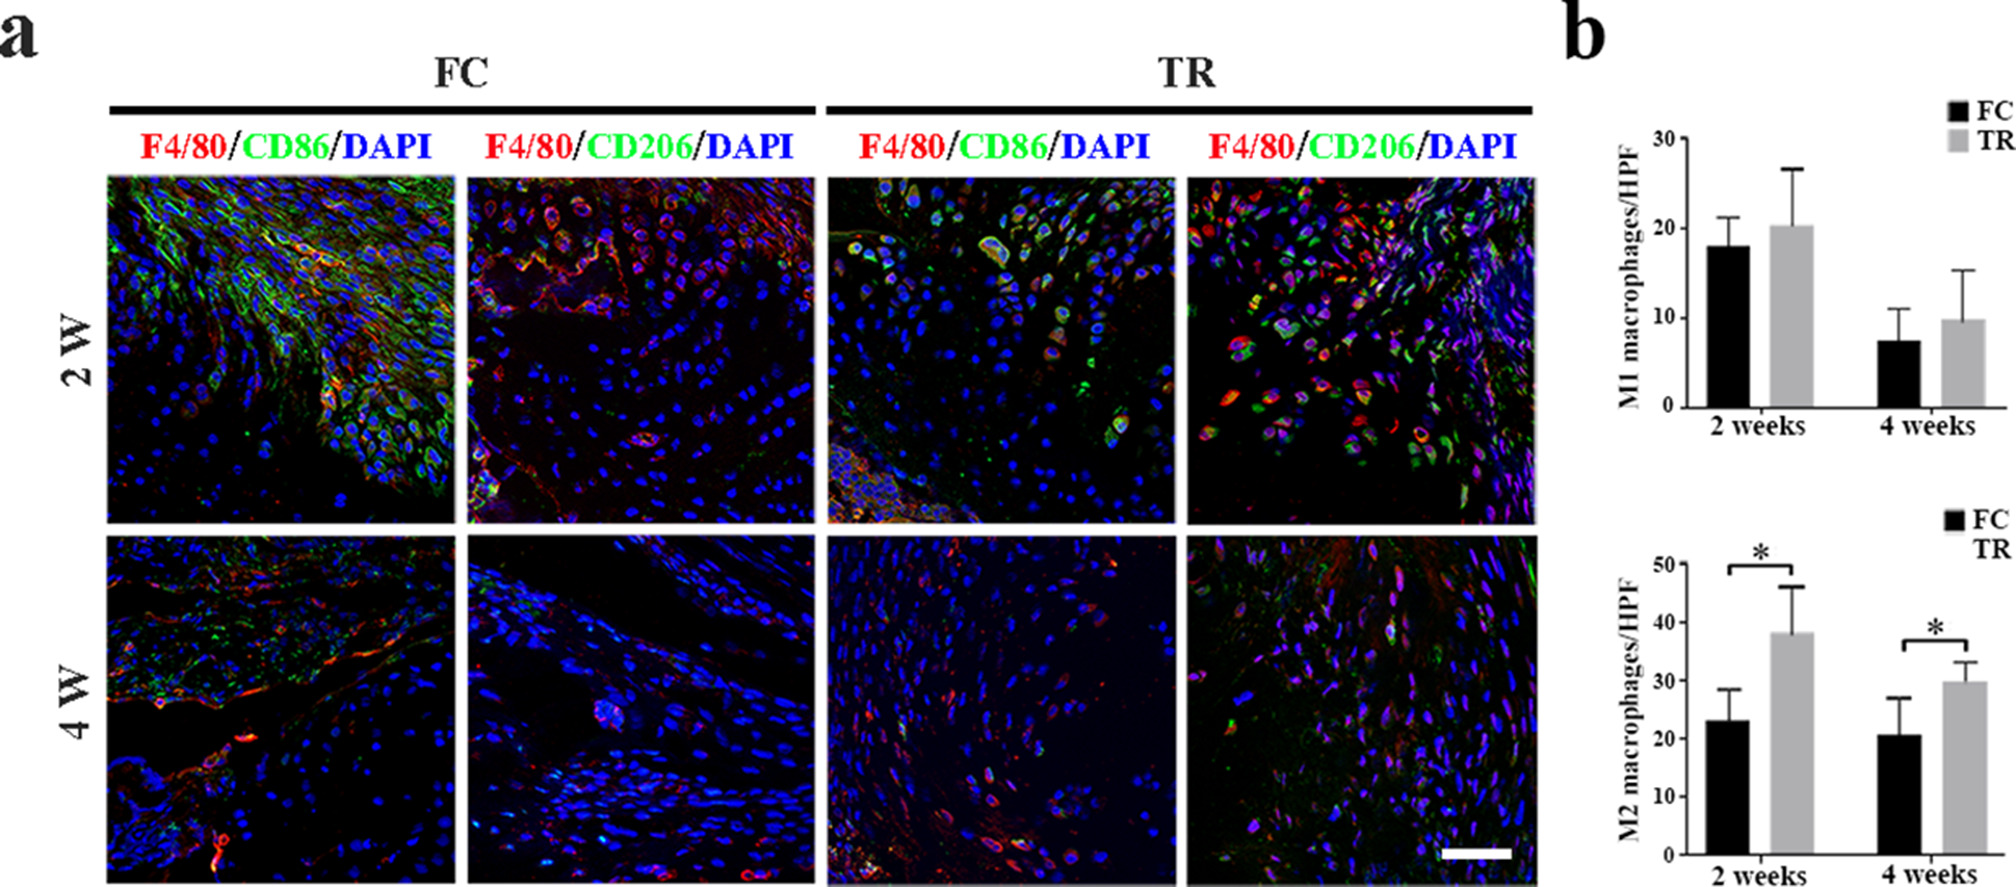 Fig. 1 
            The effects of mechanical stimulation on macrophage polarization during rotator cuff (RC) tendon-bone (T-B) healing. a) Immunofluorescent staining of total macrophages biomarker, F4/80 (red), and M1-like macrophage biomarker, CD86 (green) or M2-like macrophage biomarker, CD206 (green) in the repaired RC tendon-bone interface (TBI) at two and four weeks after surgery. Scale bar: 100 µm. b) Quantification of M1 (F4/80+CD86+ cells) and M2 macrophages (F4/80+CD206+ cells) in Fig. 1a. N = 6 per group. *p < 0.05, two-way analysis of variance followed by Tukey’s multiple comparisons test. DAPI, 4’,6-diamidino-2-phenylindole; FC, free cage activities group; HPF, high-power field; TR, treadmill running group.
          